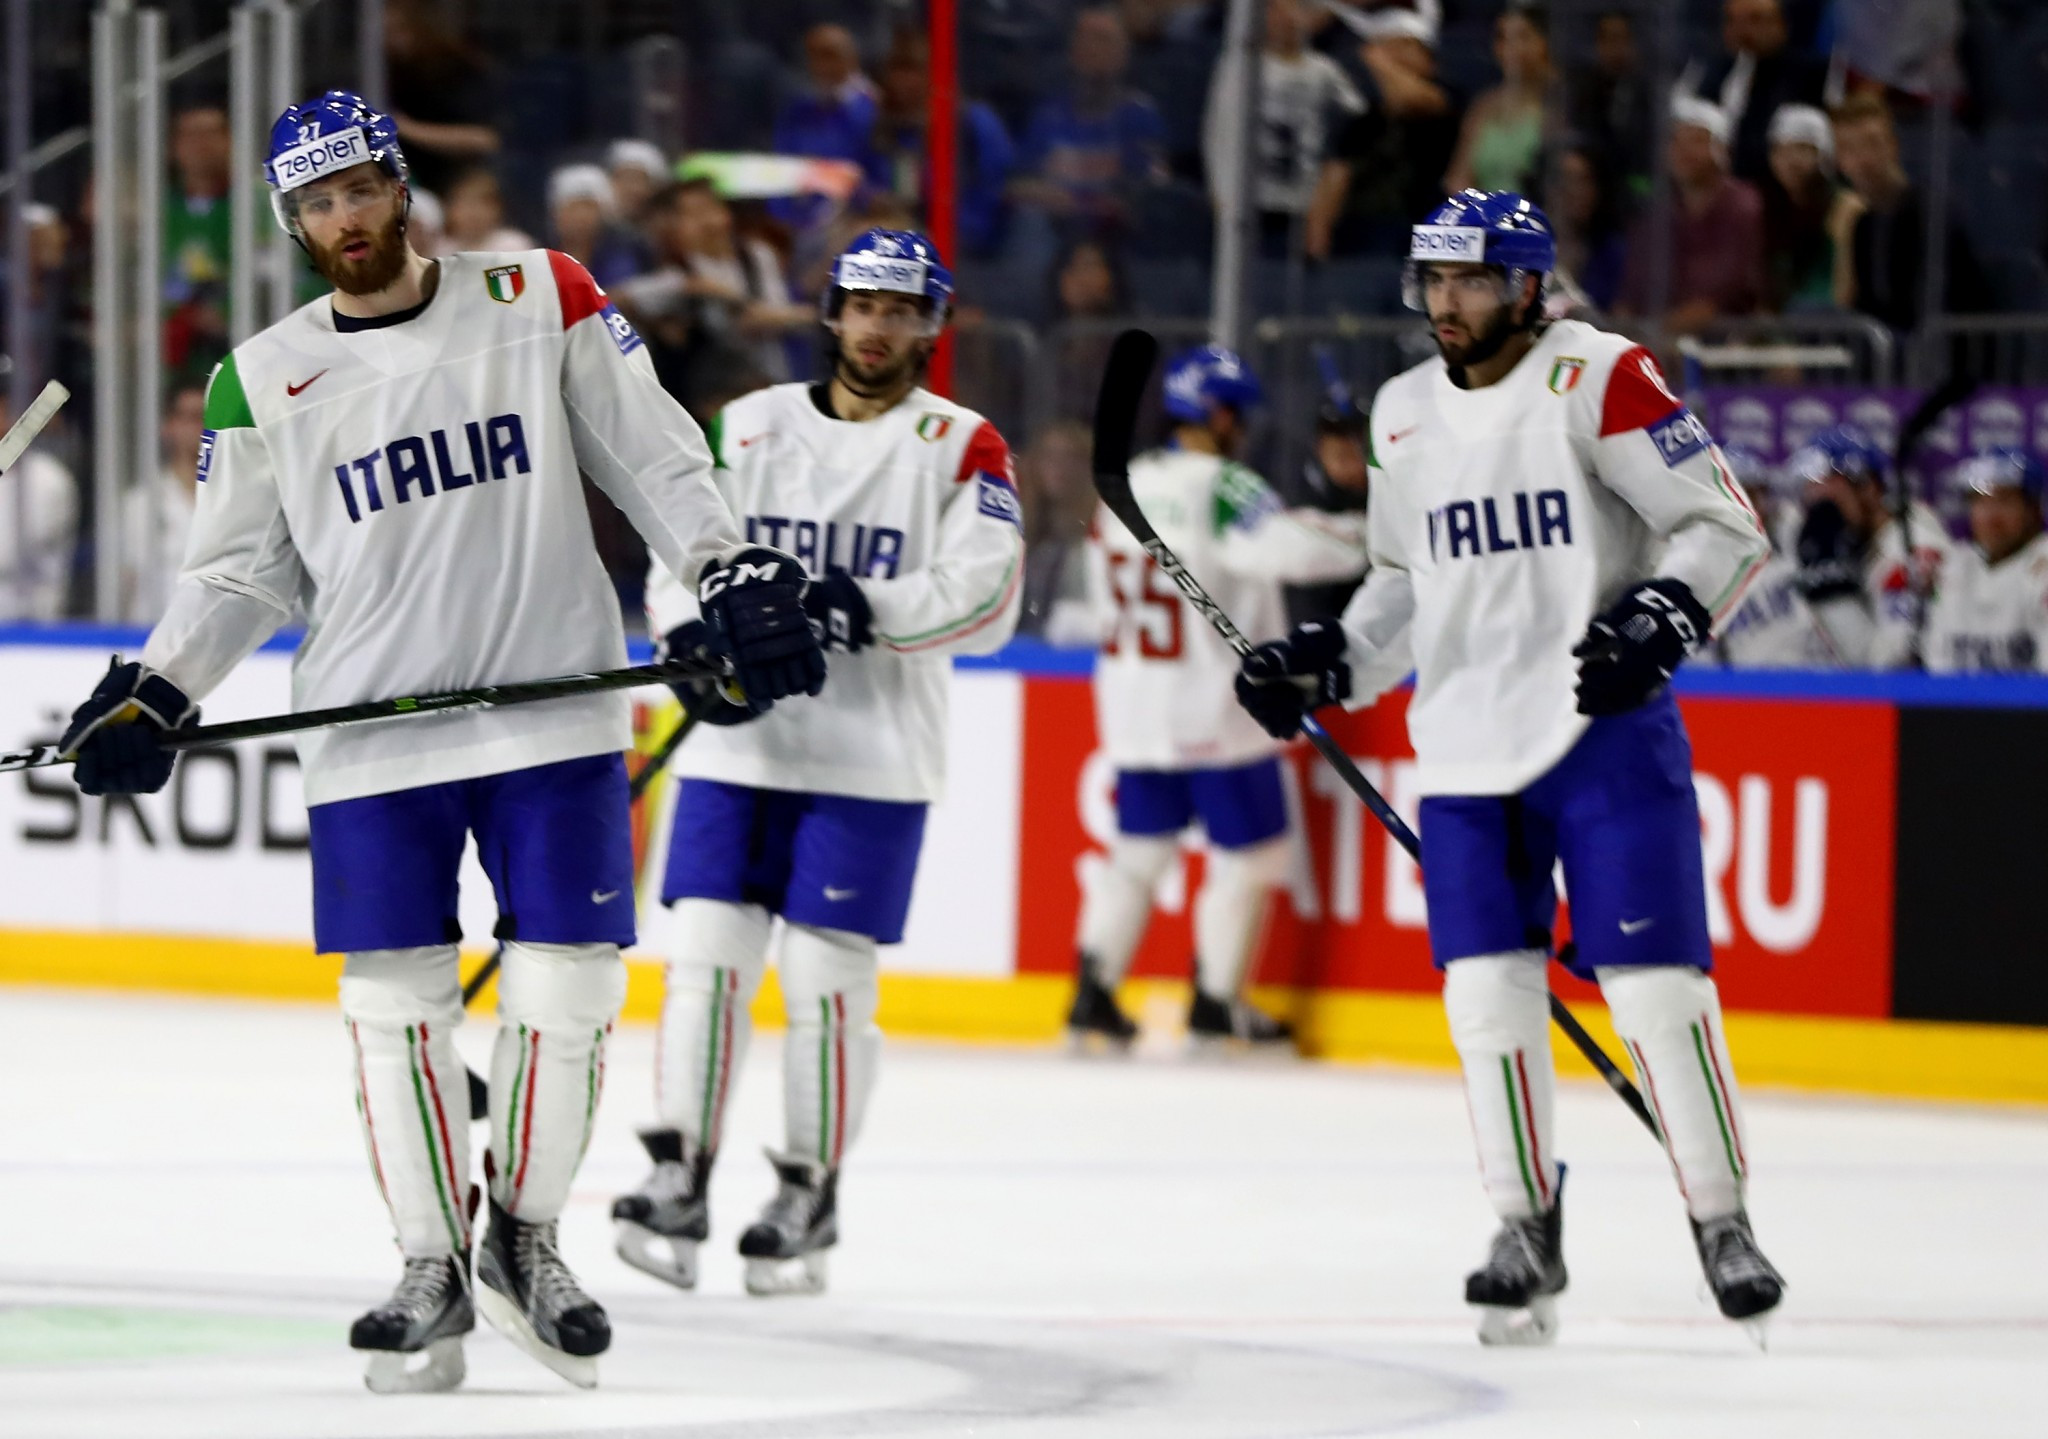 Italy lost all seven of their IIHF World Championship matches this year ©Getty Images